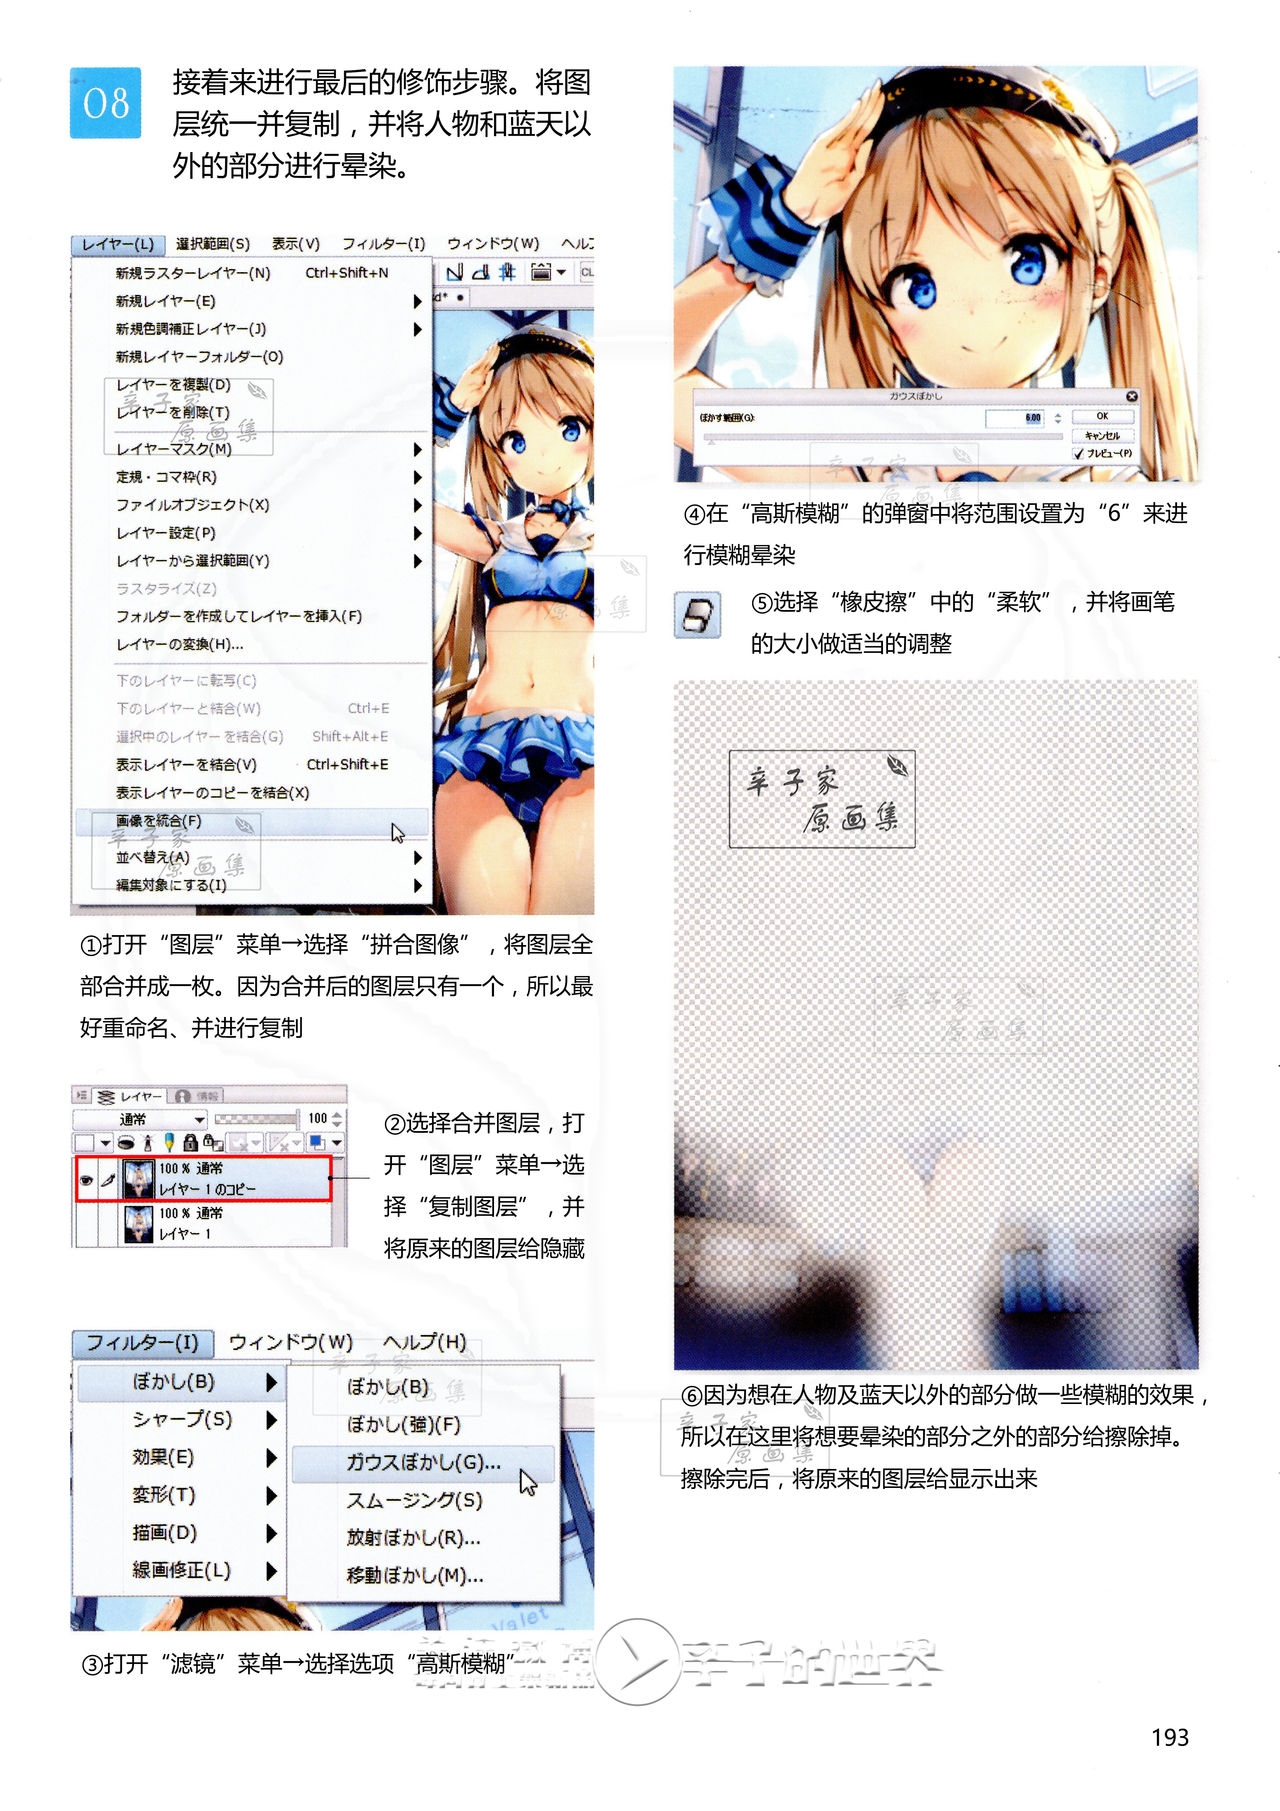 [Anmi] Lets Make ★ Character CG illustration techniques vol.9 [Chinese] 191